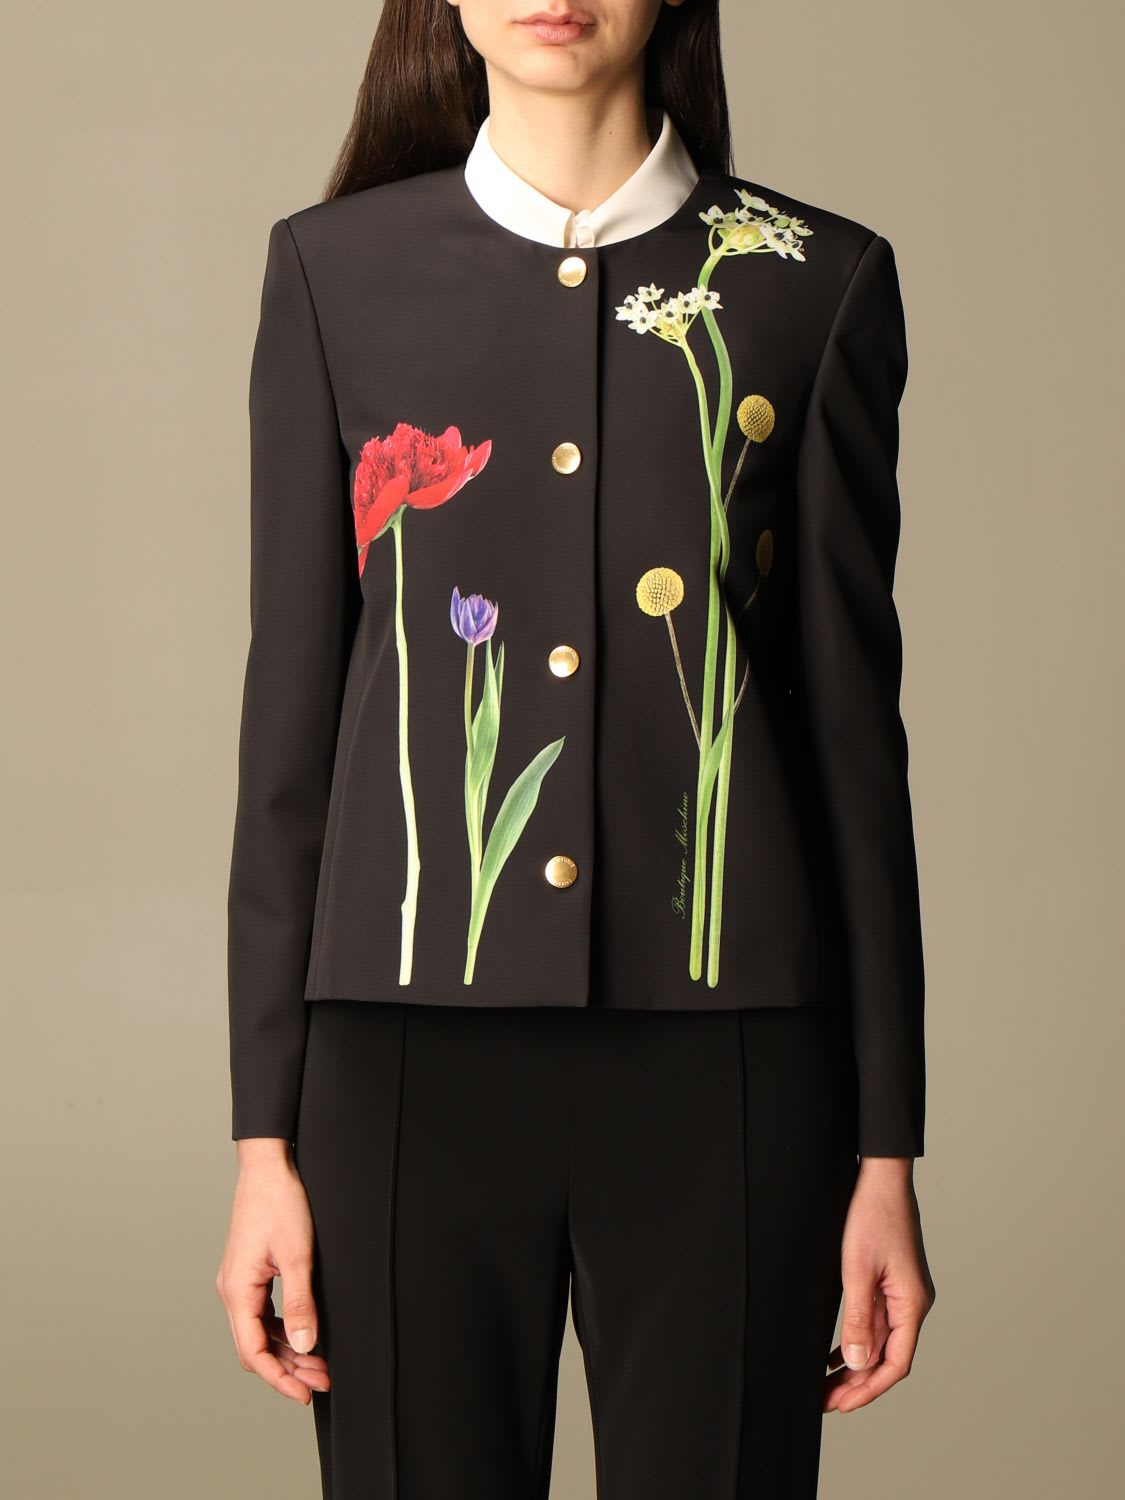 Boutique Moschino Jacket Moschino Boutique Jacket In Cady With Botanical Pattern